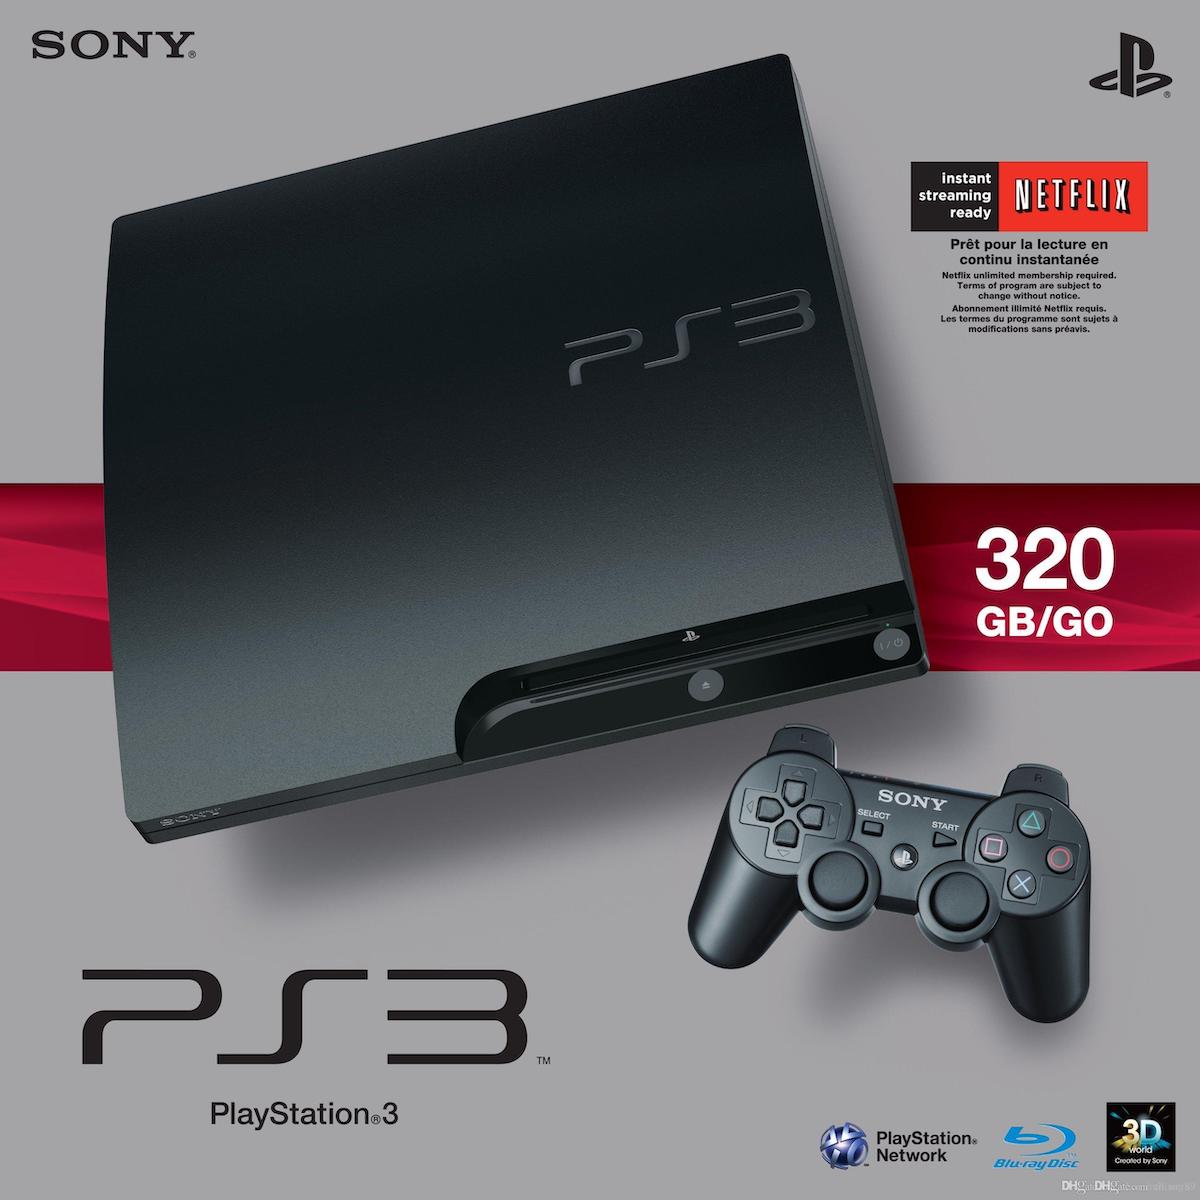 barndom metal Recollection Sony PlayStation 3 Gaming Console Price Slash